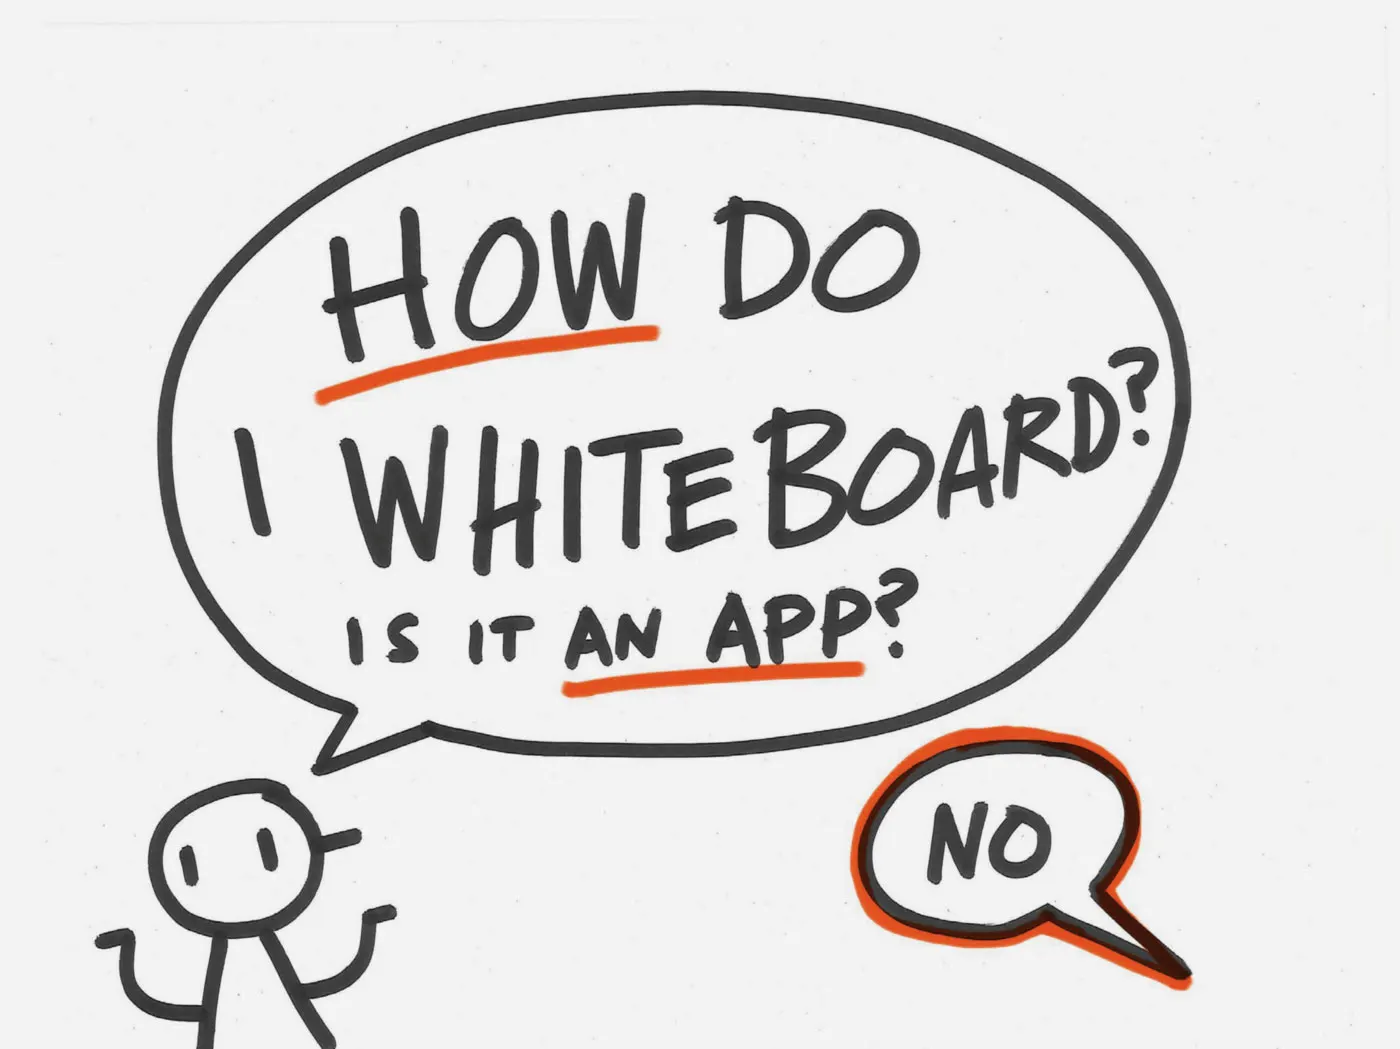 Black marker sketch with a stick figure asking "How do I whiteboard? Is it an app?" and the response "No" in a word bubble.